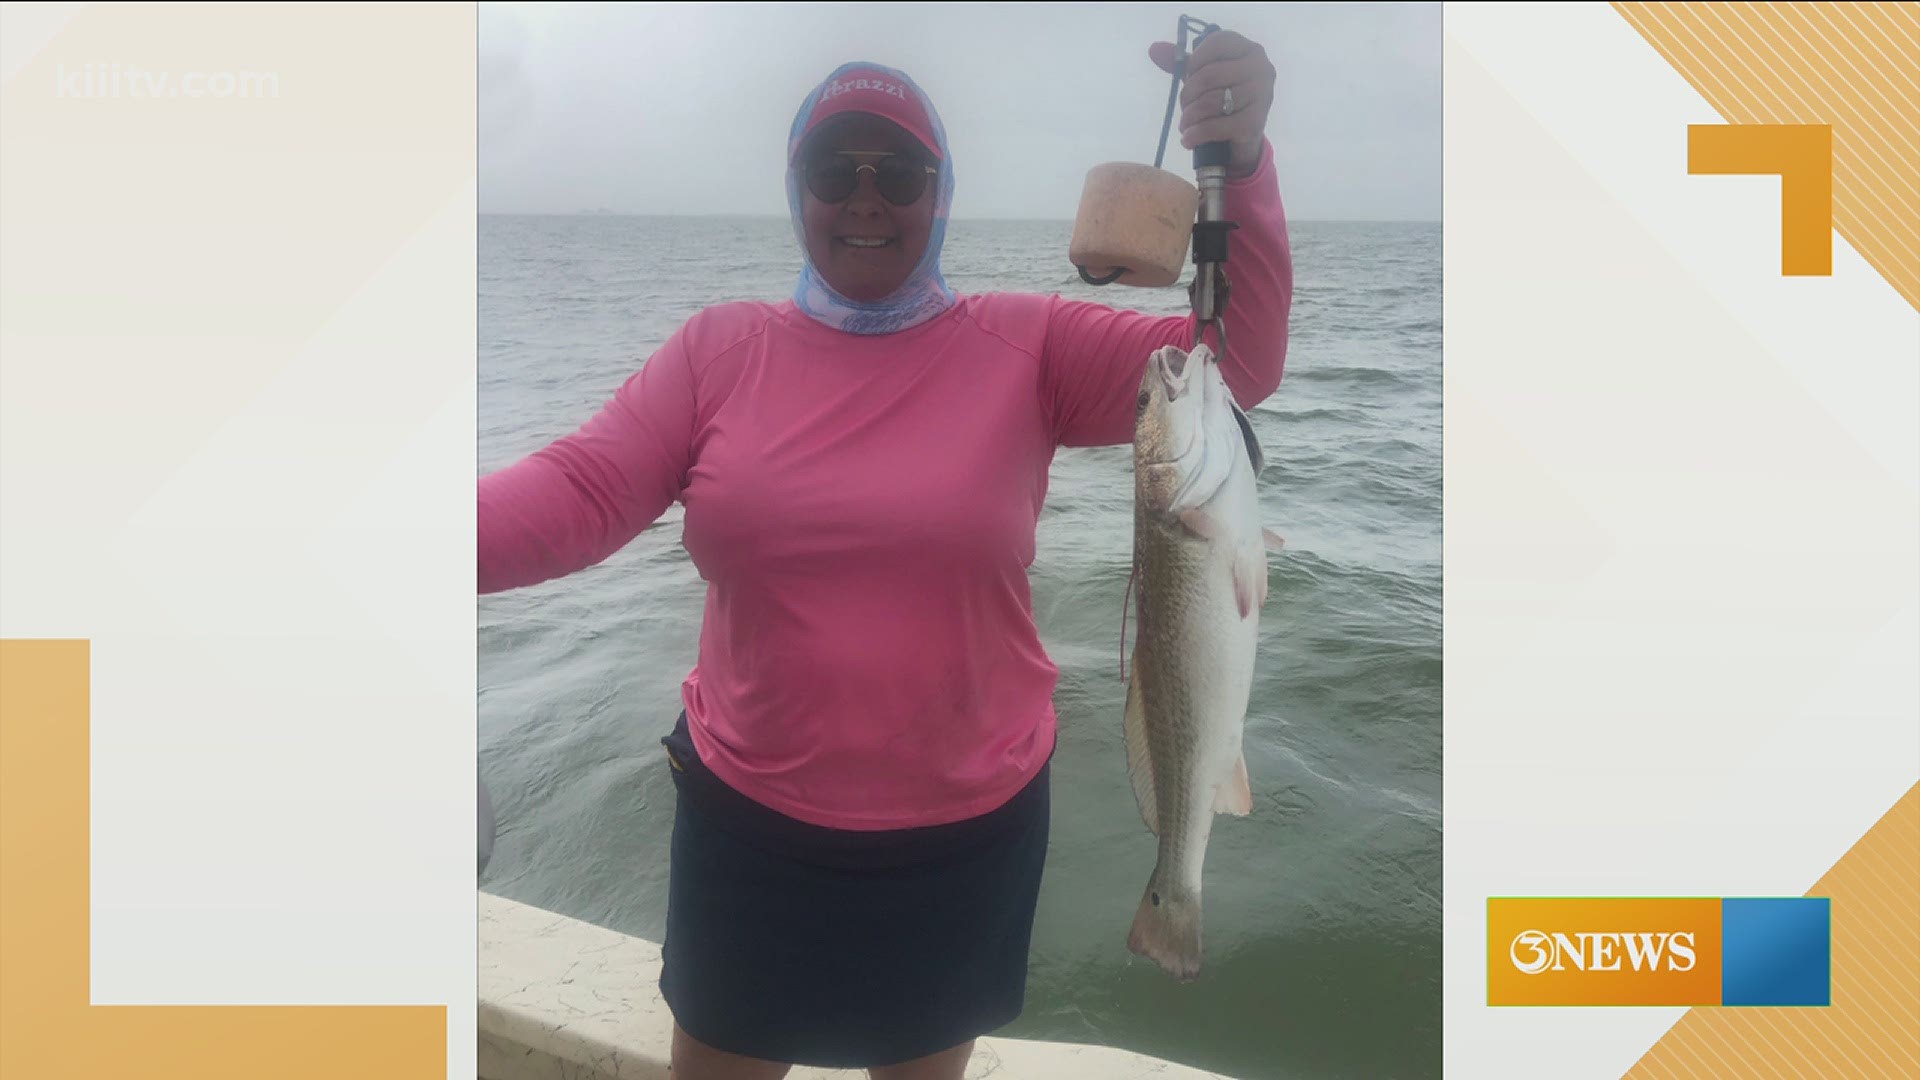 The latest winner of a brand new truck and boat from the CCA Star Tournament is Bettina Mathis from Dripping Springs. She caught it along the Corpus Christi coast.